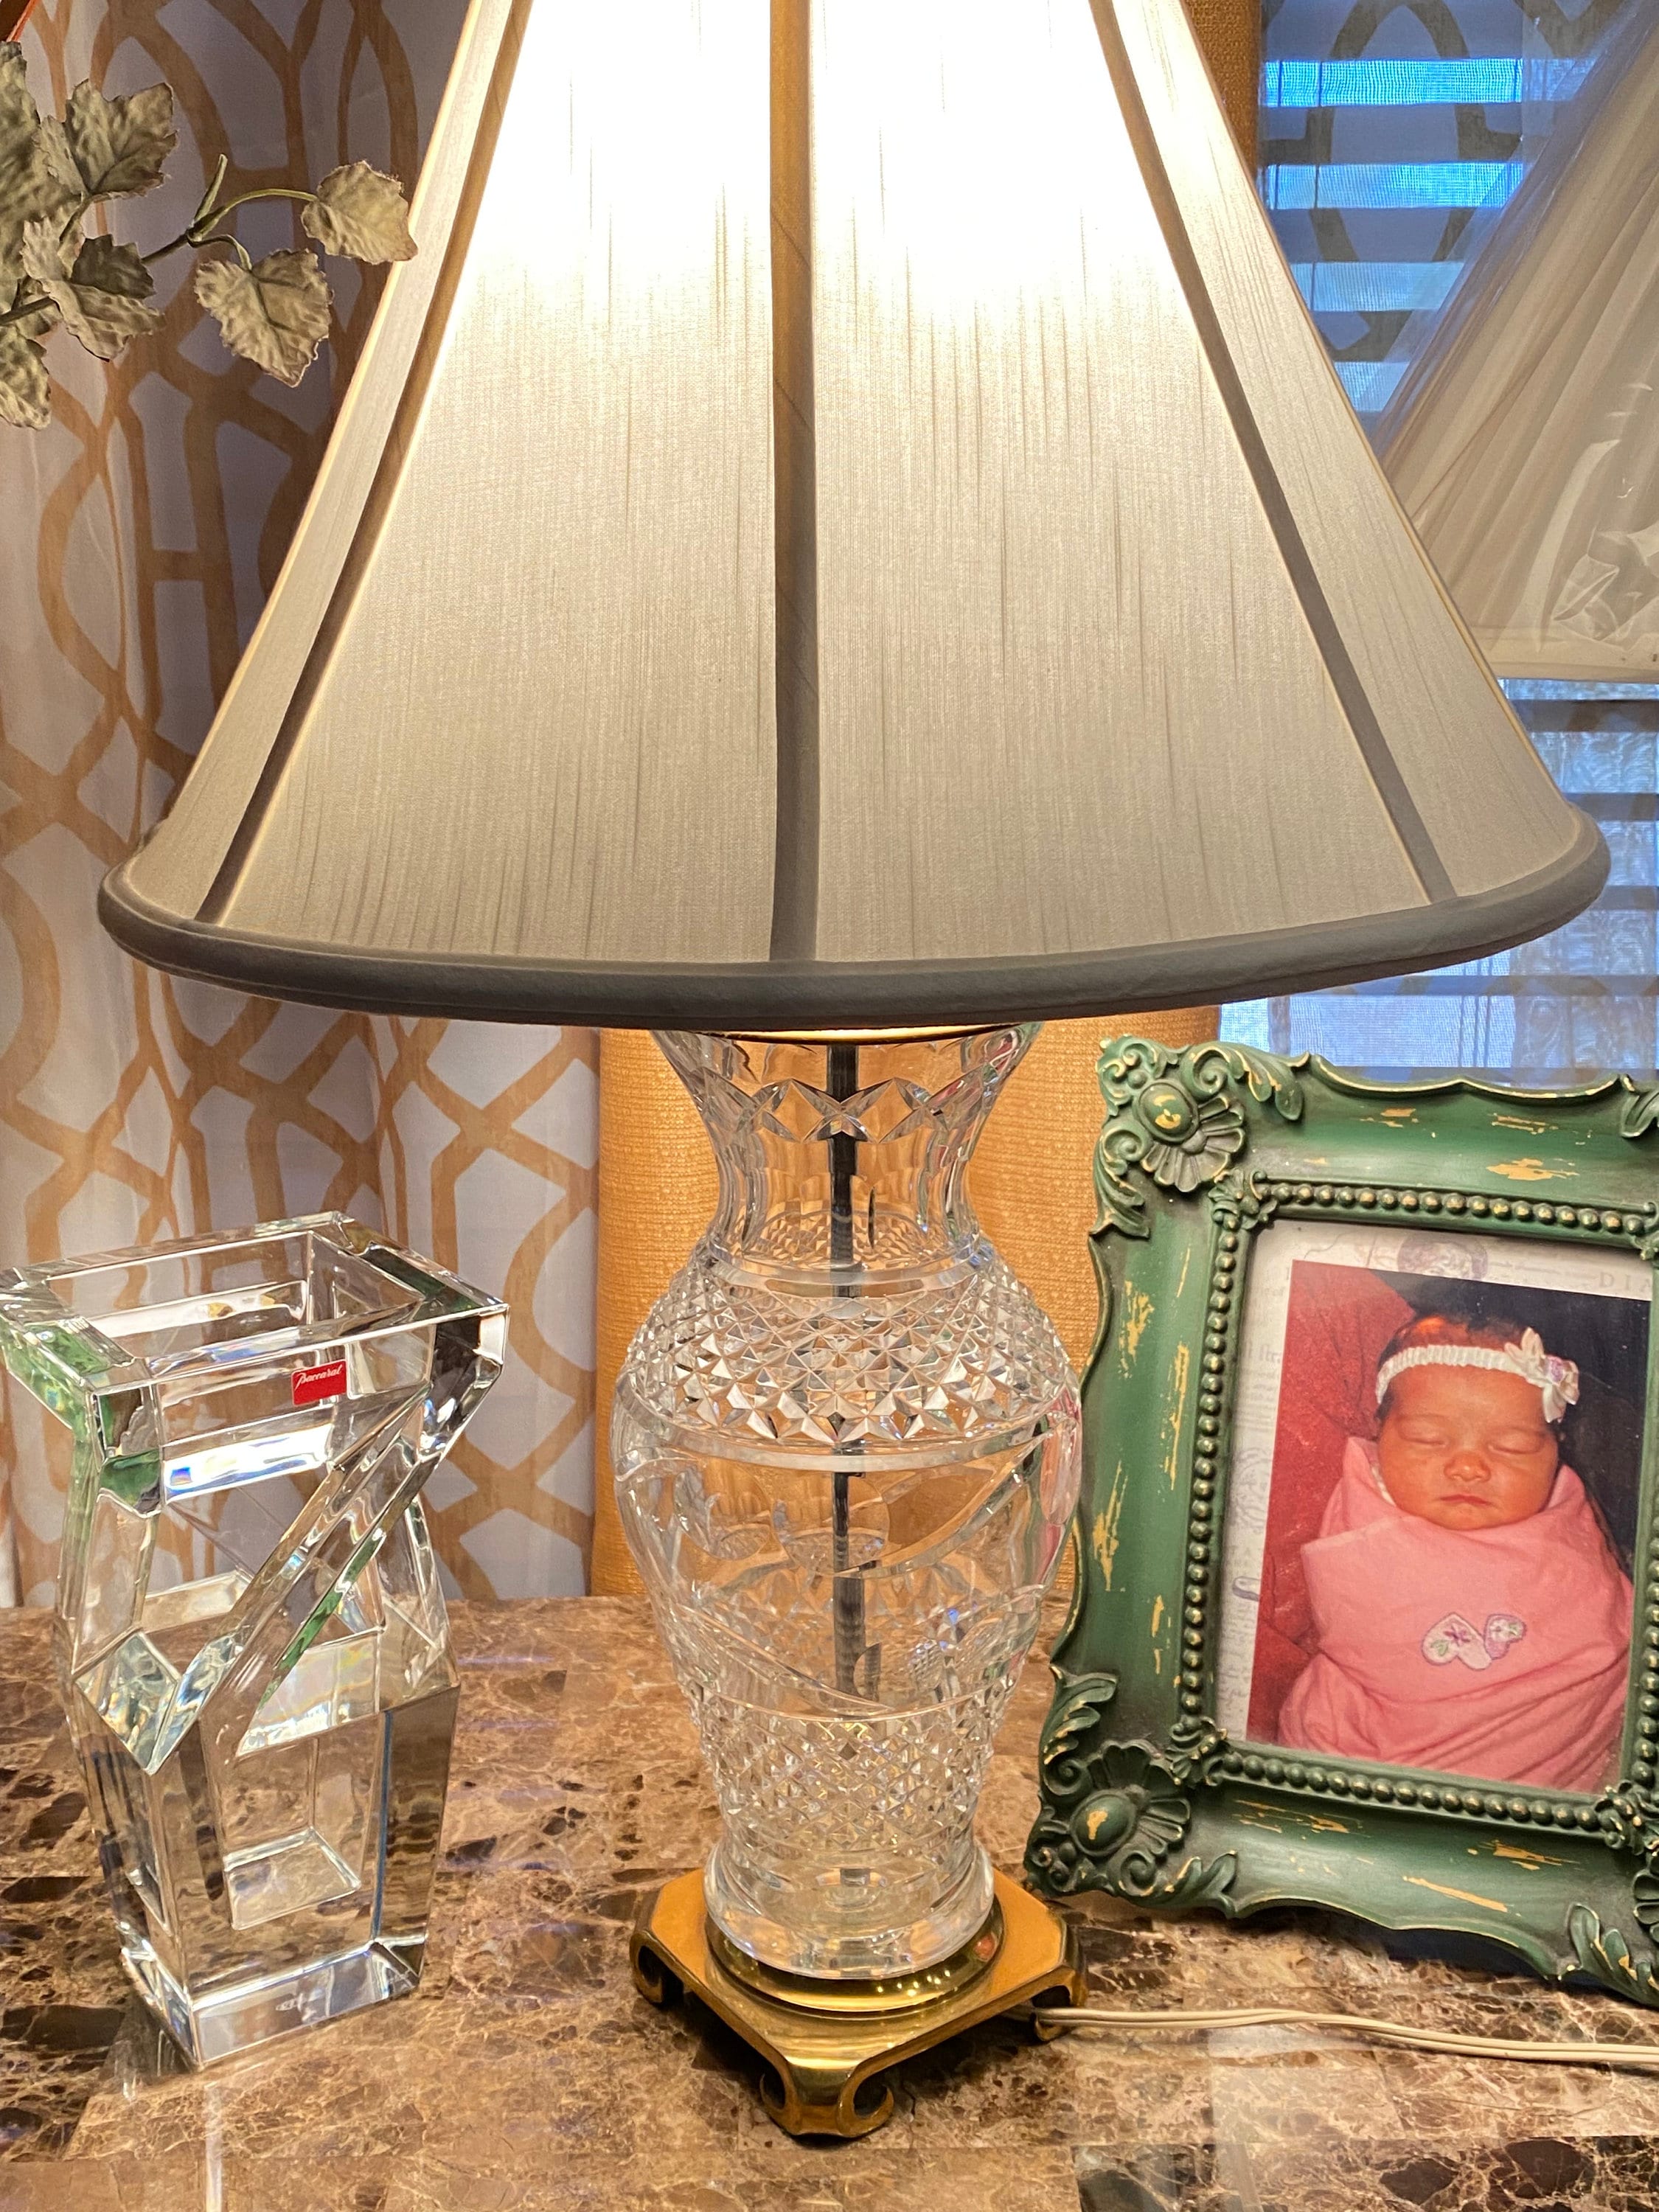 Waterford Crystal Equestrian Brass Lamp Glandore Pattern Authentic,  Waterford Rising Horse Unique Elegant Home Lighting Luxury Table Lamp 